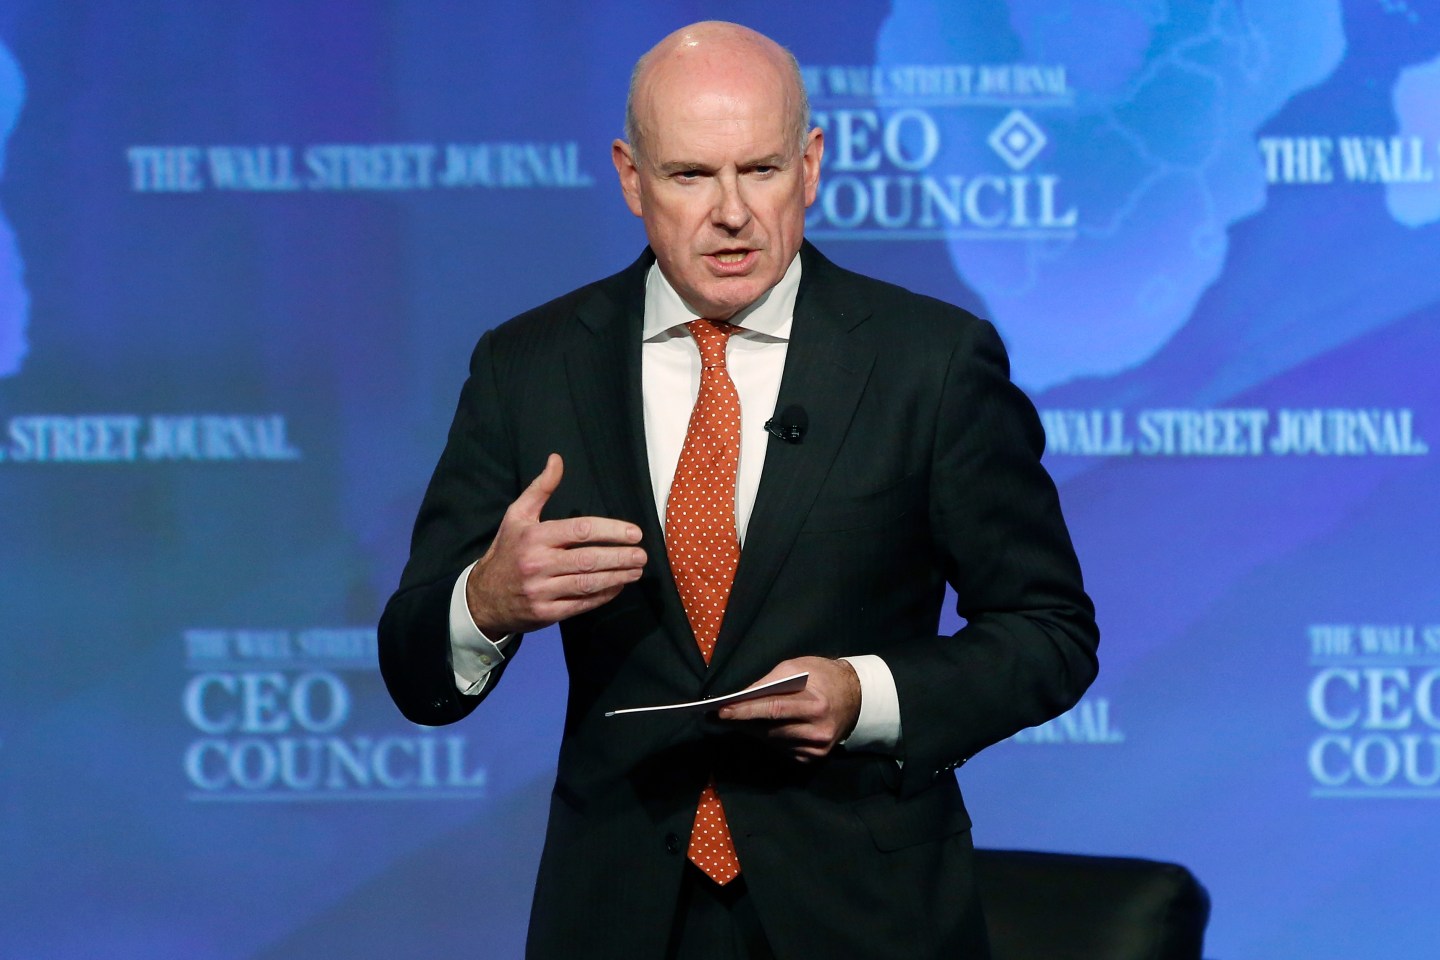 Dow Jones Editor-in-Chief Baker welcomes participants to the Wall Street Journal's CEO Council annual meeting in Washington